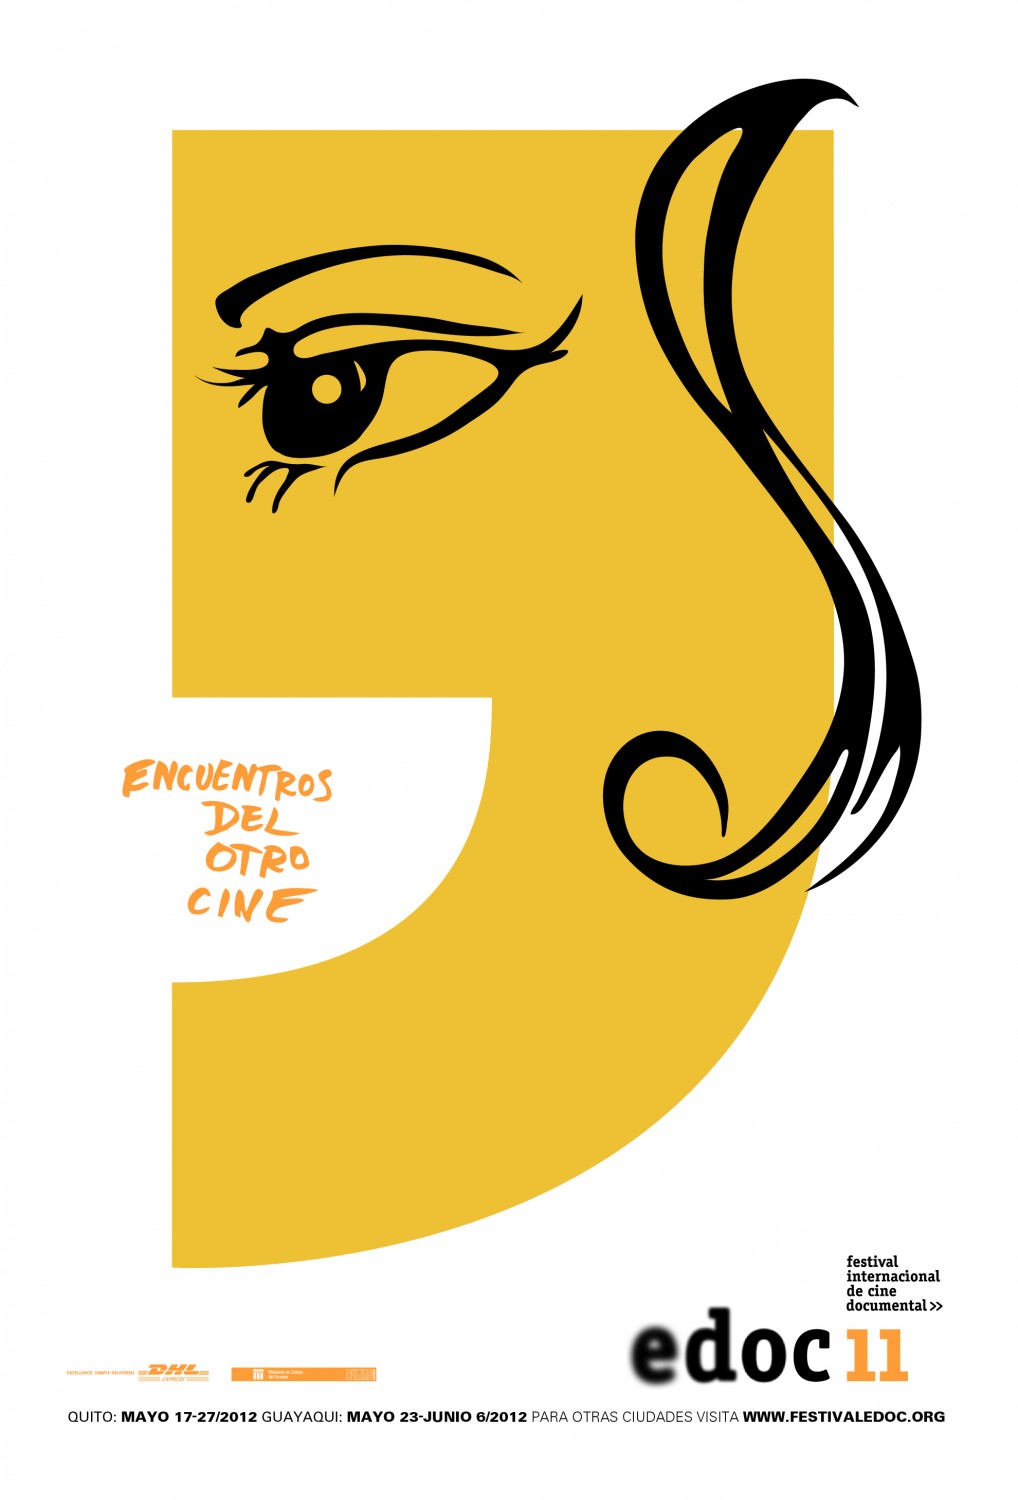 Extra Large TV Poster Image for Encuentros del Otro Cine Festival (#2 of 2)